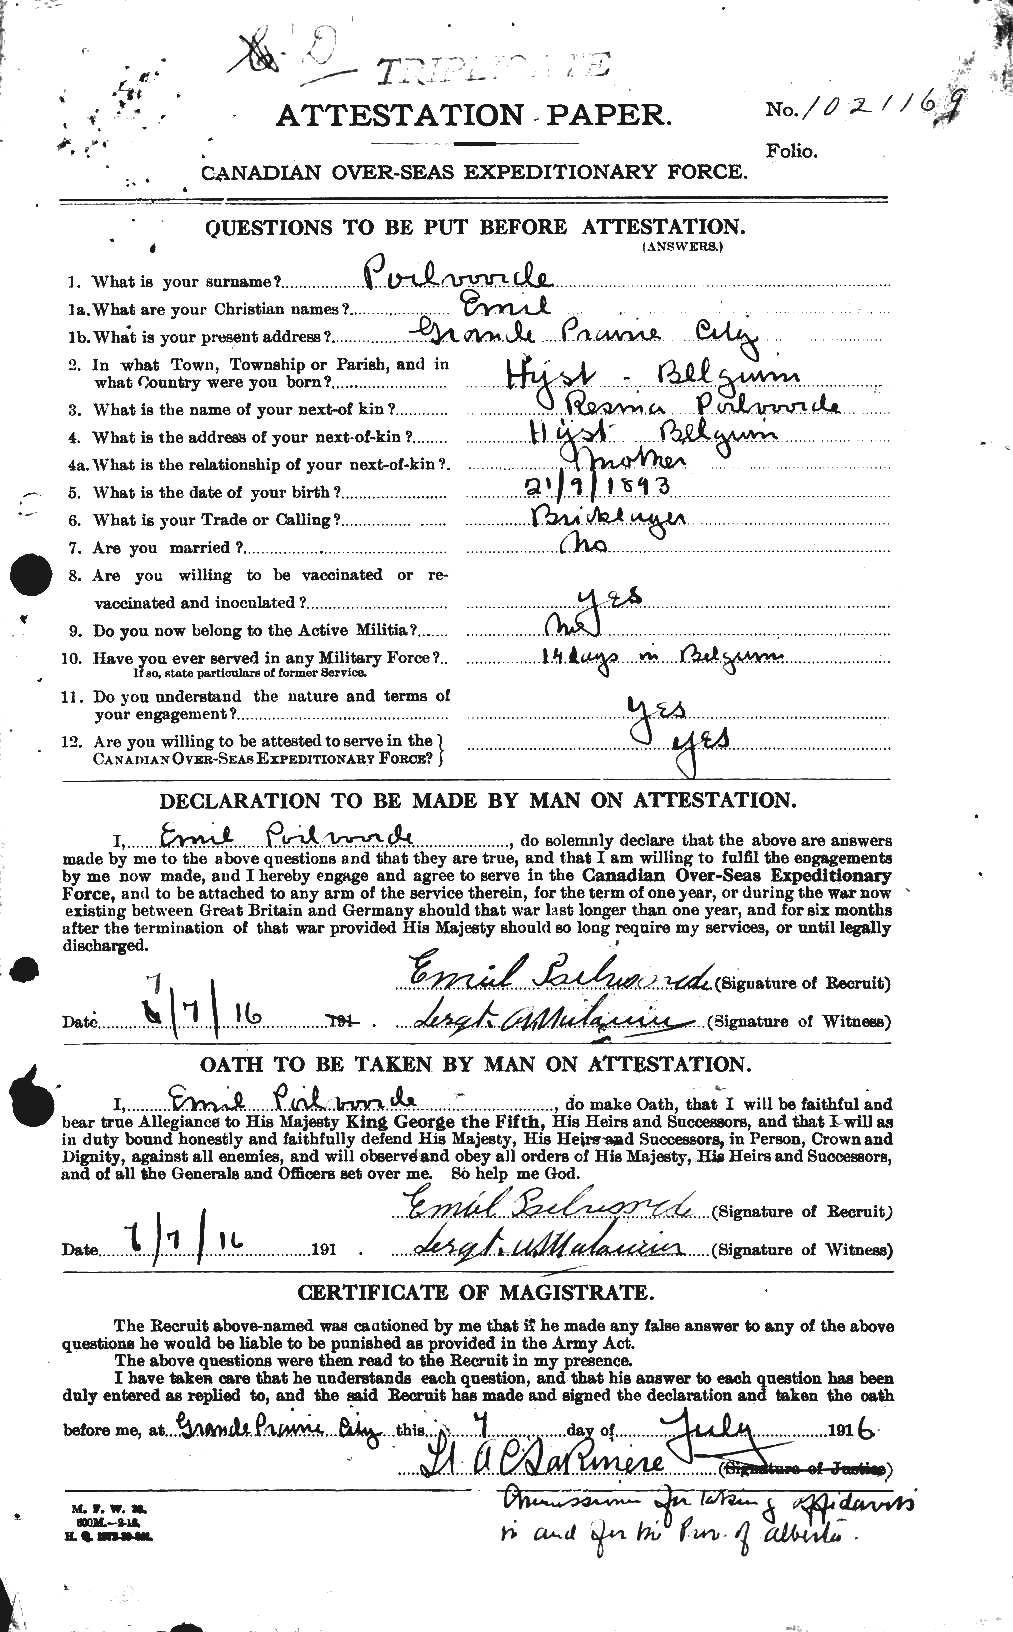 Personnel Records of the First World War - CEF 579277a